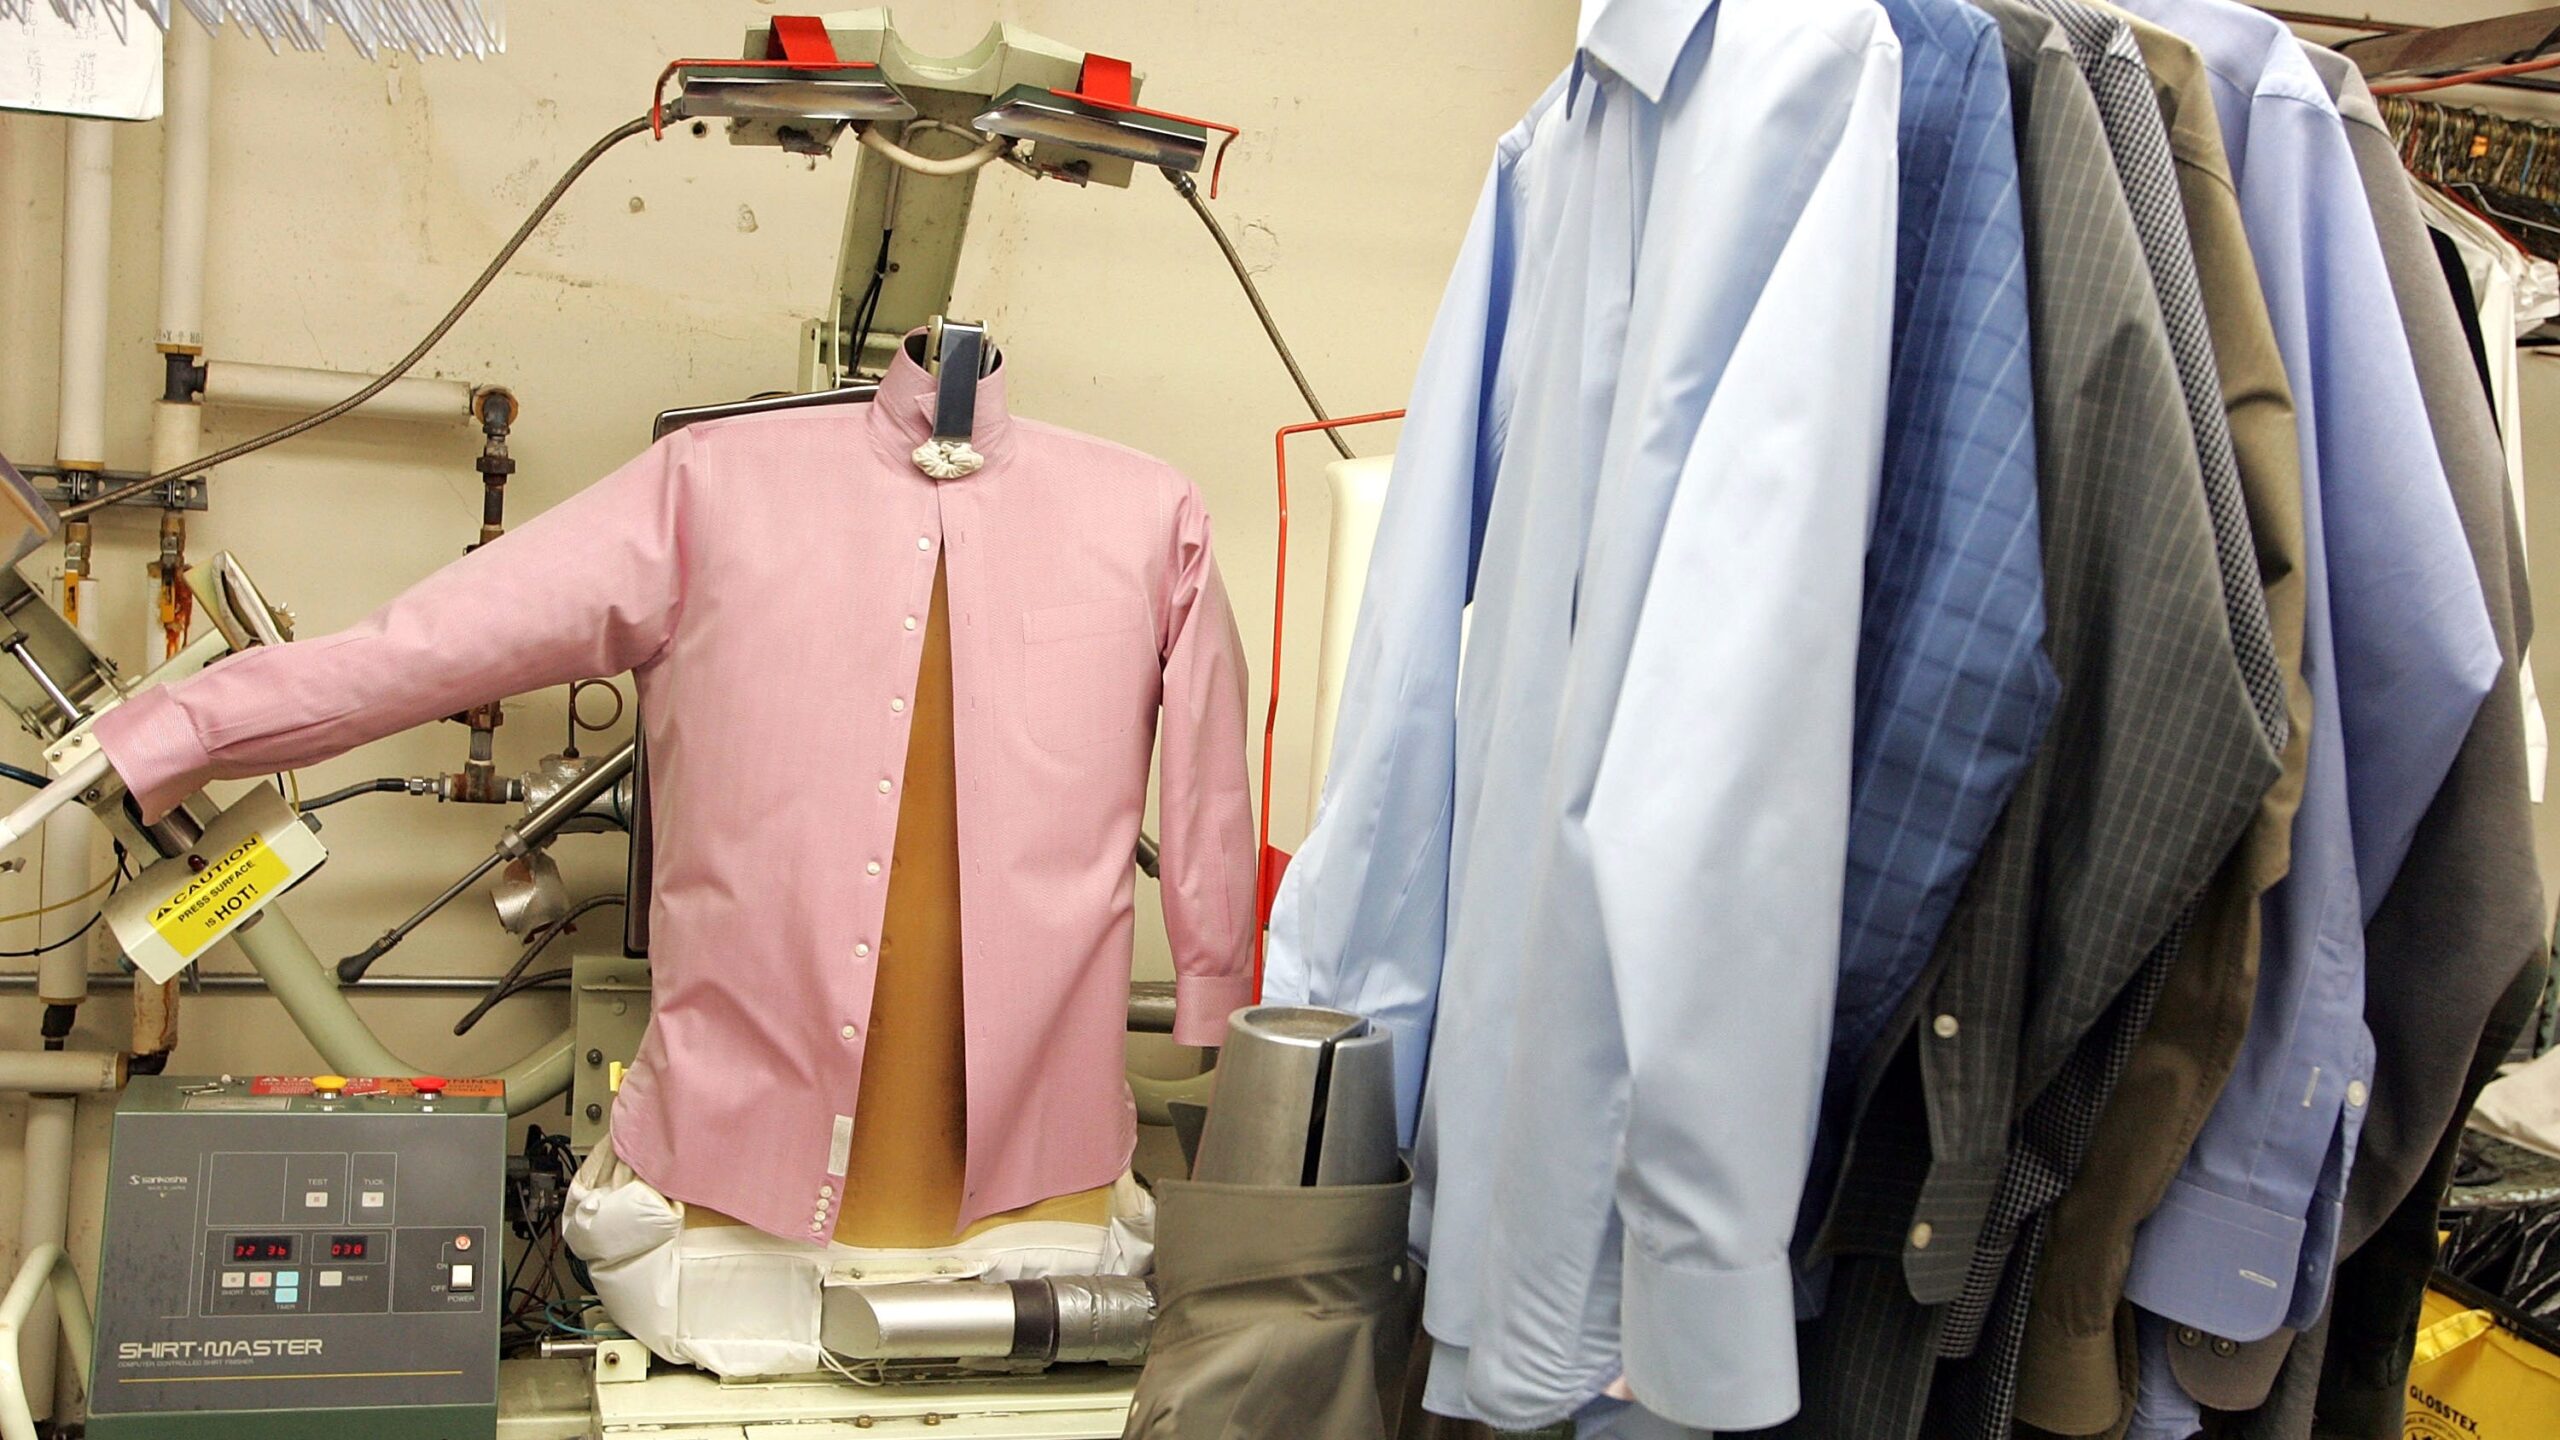 Does Dry Cleaning Damage Clothes